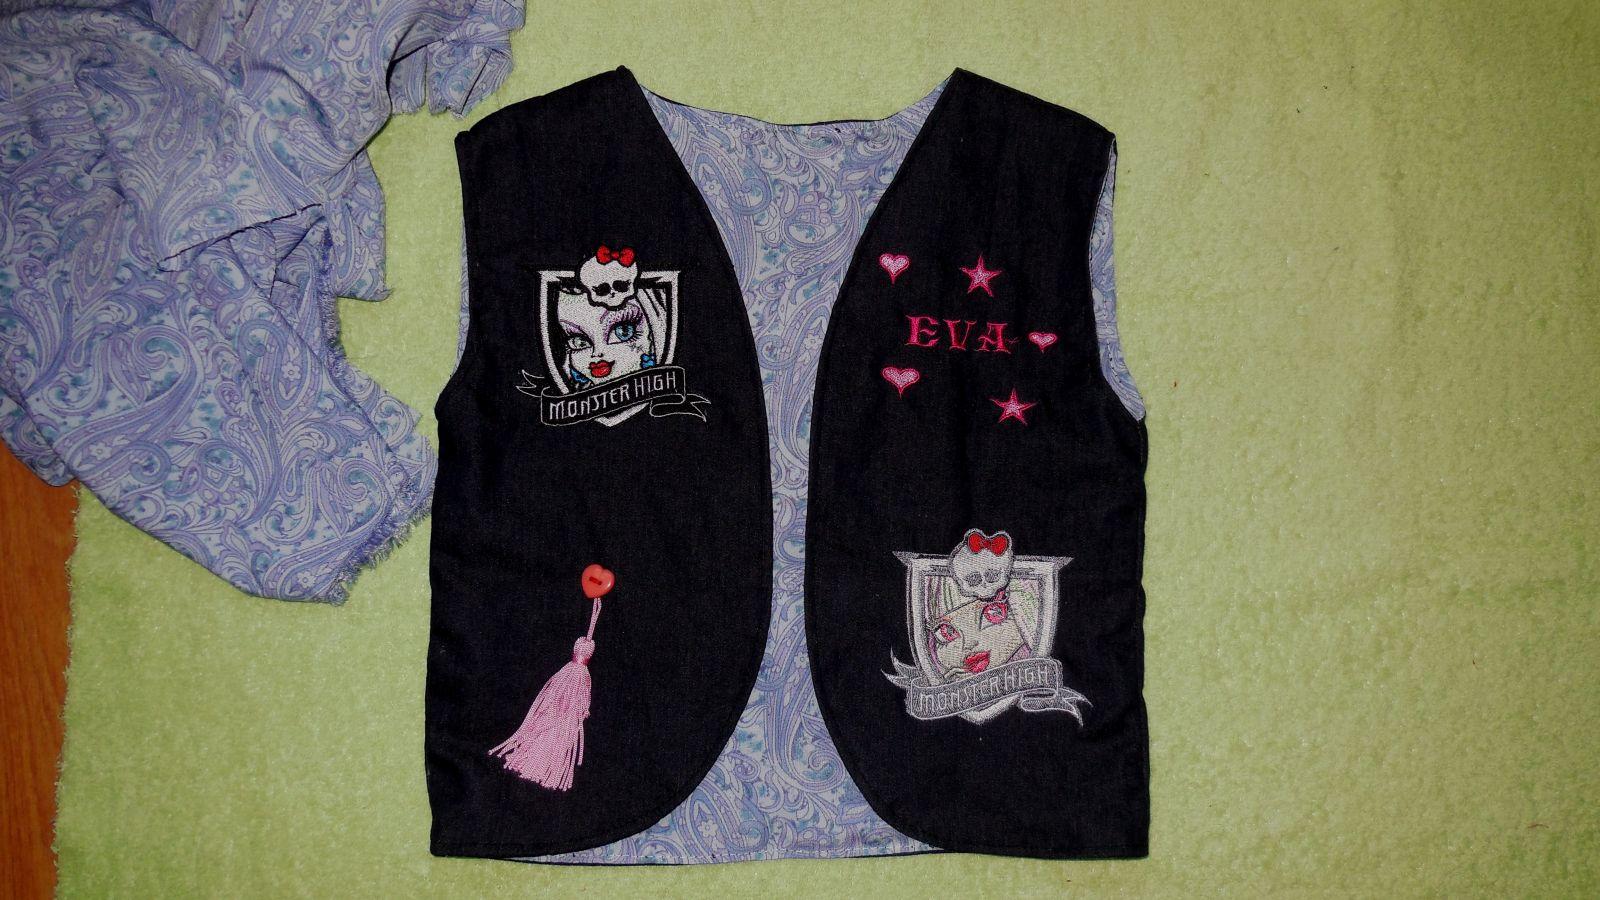 Jacket with Monster High embroidery designs